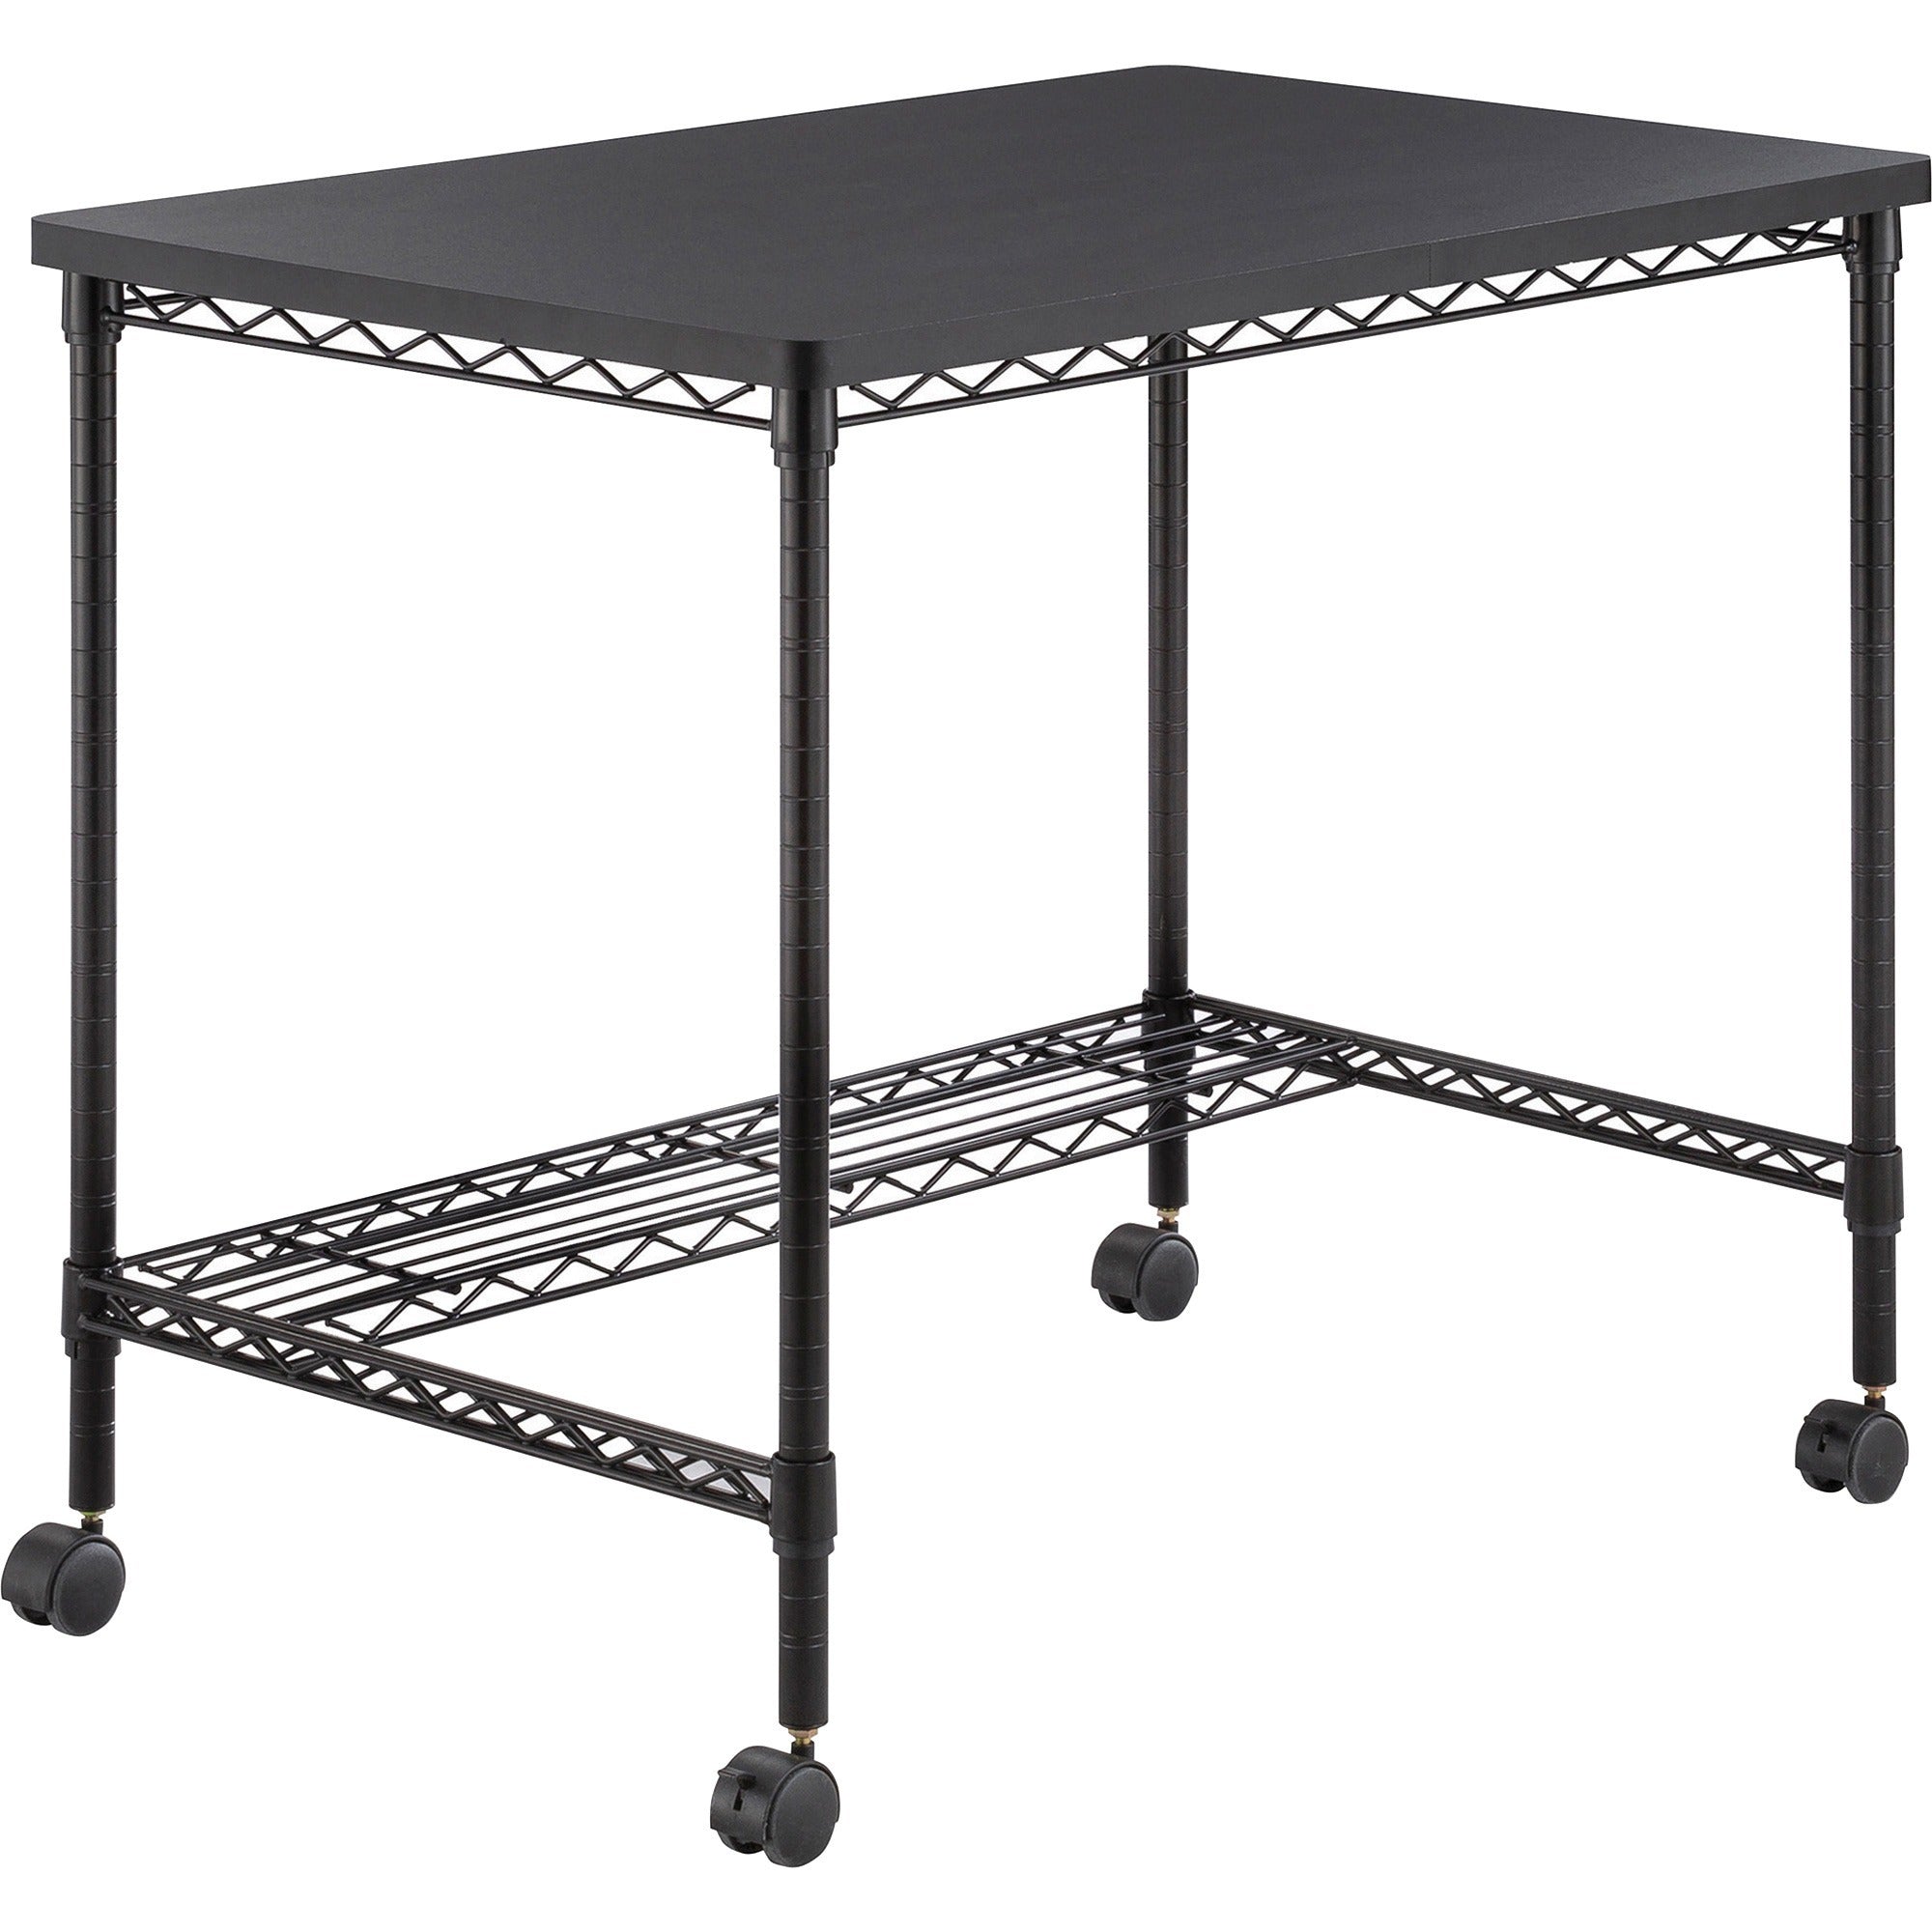 safco-mobile-wire-desk-for-table-topmelamine-black-top-x-3575-table-top-width-x-24-table-top-depth-3075-height-assembly-required-black-1-each_saf5203bl - 1